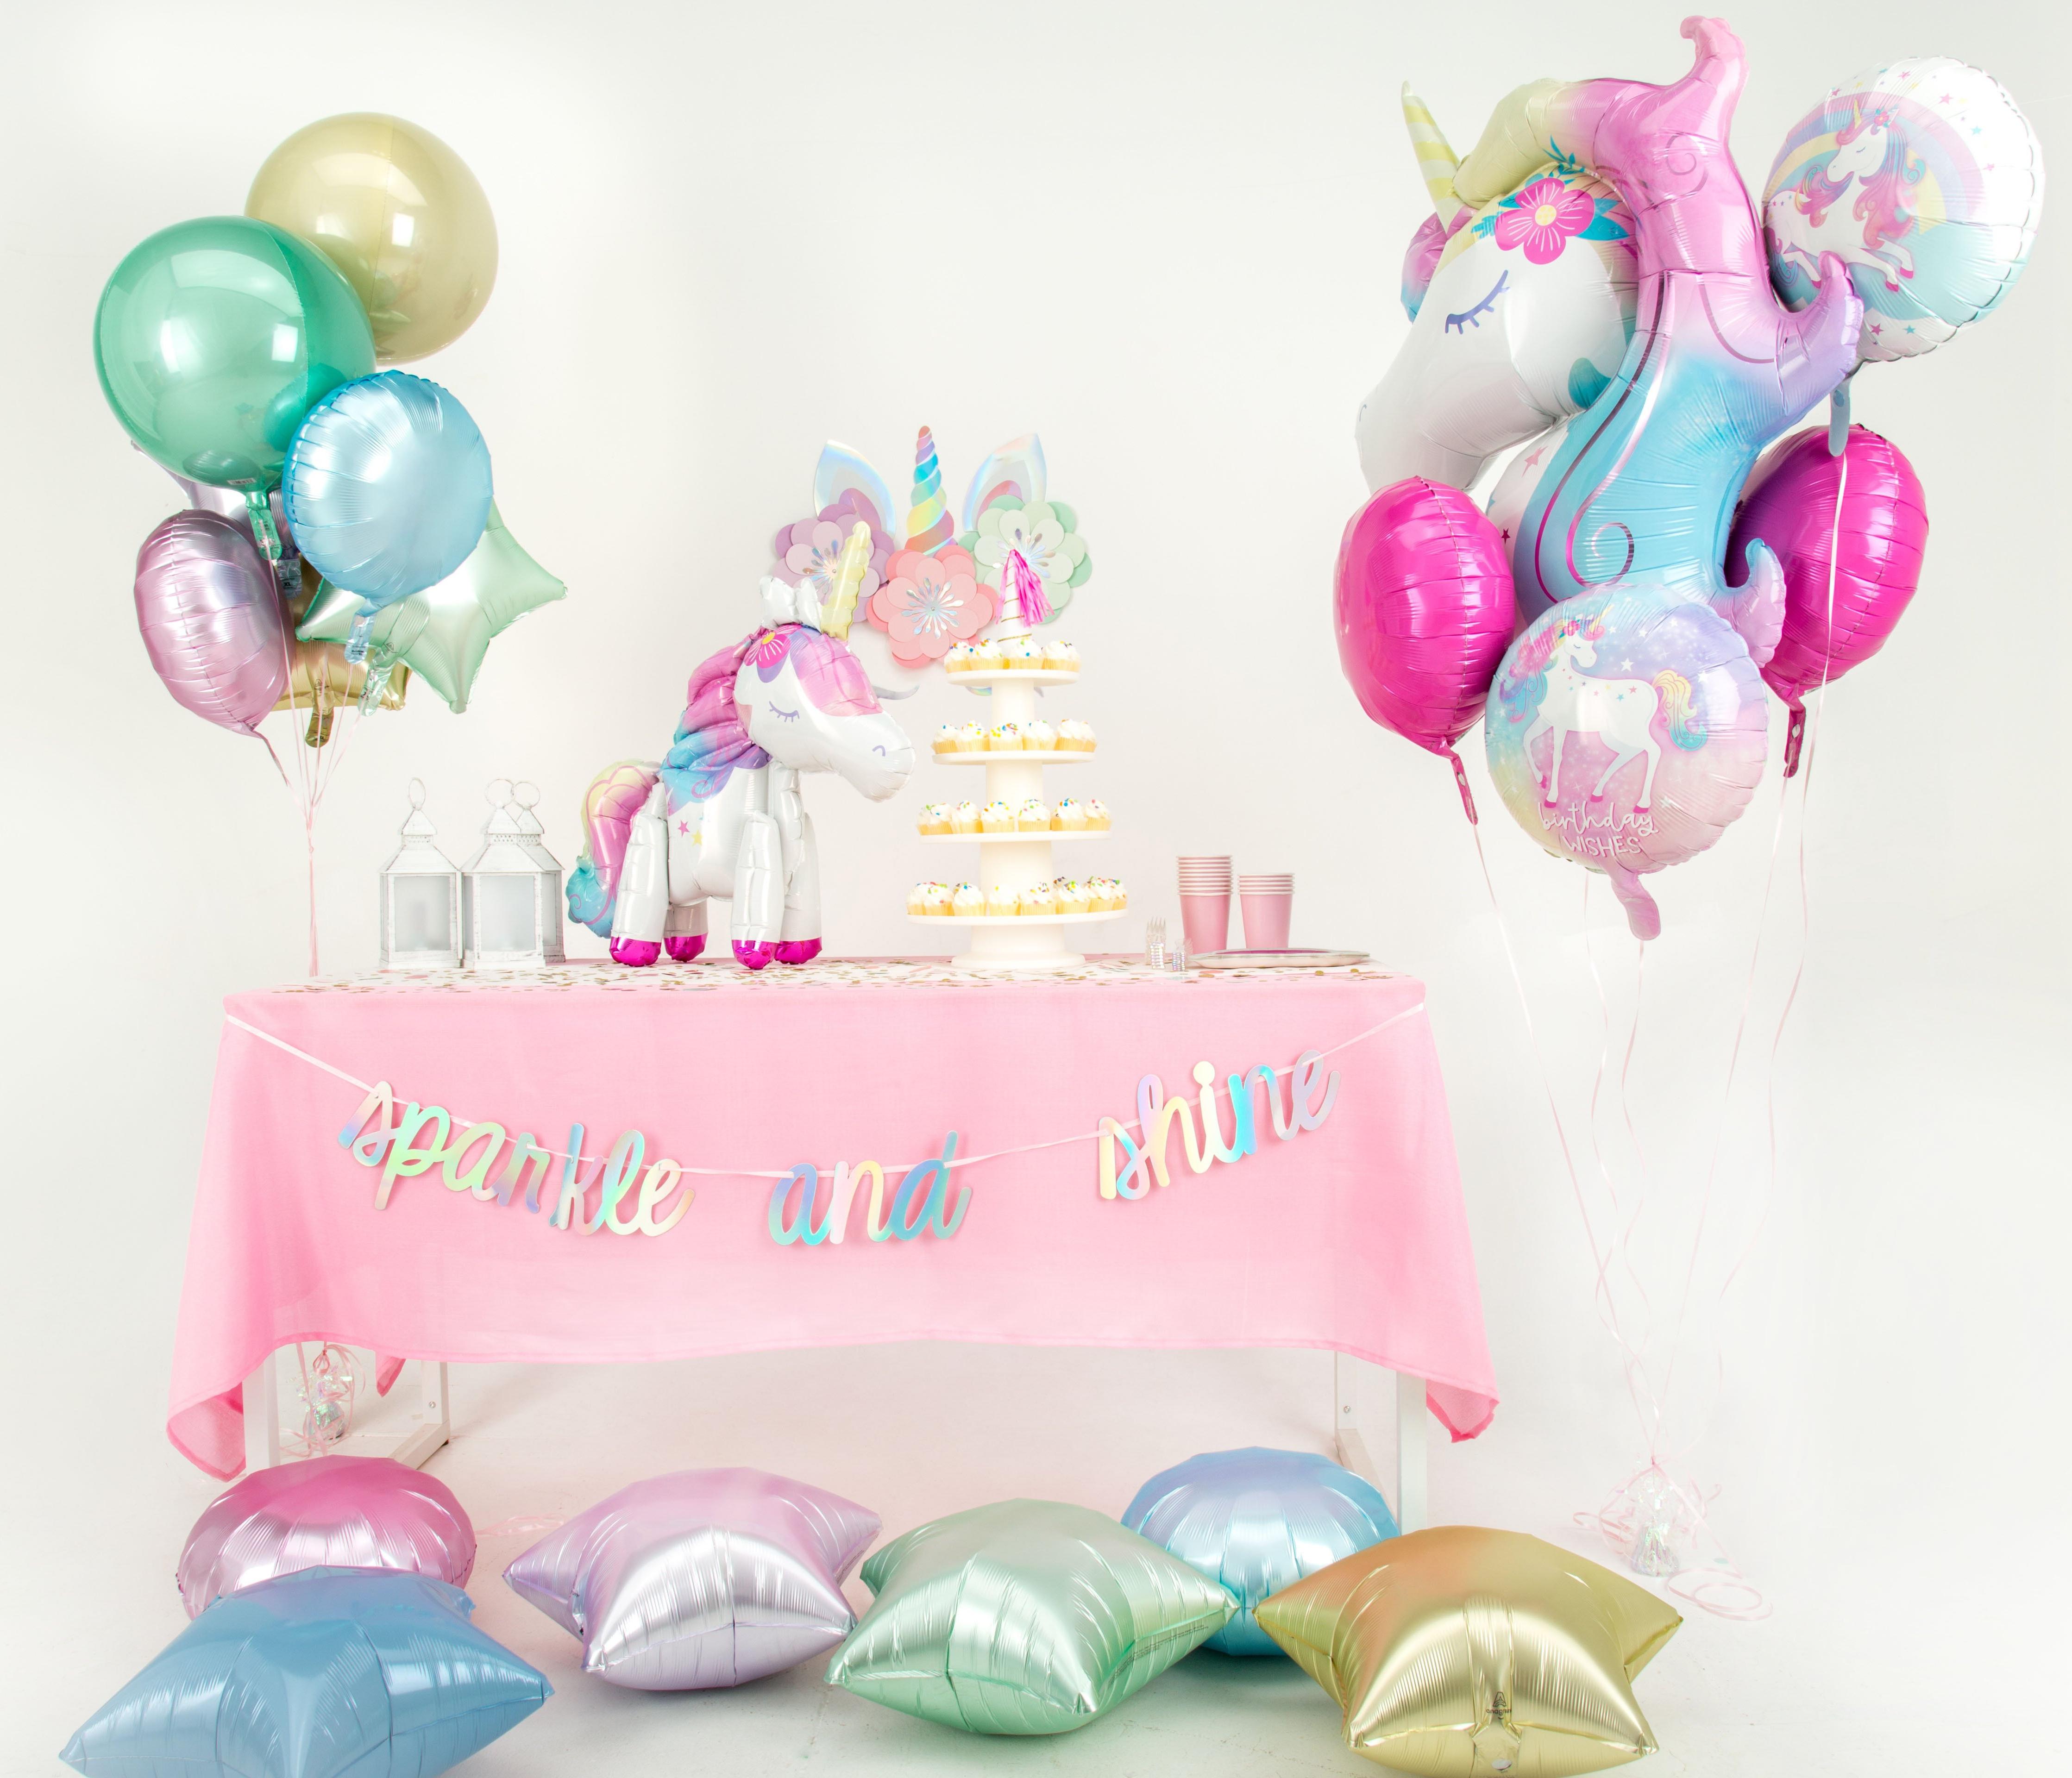 9 Magical Unicorn Party Favors Kids Will Actually Want  Unicorn party,  Unicorn themed birthday party, Unicorn party favors